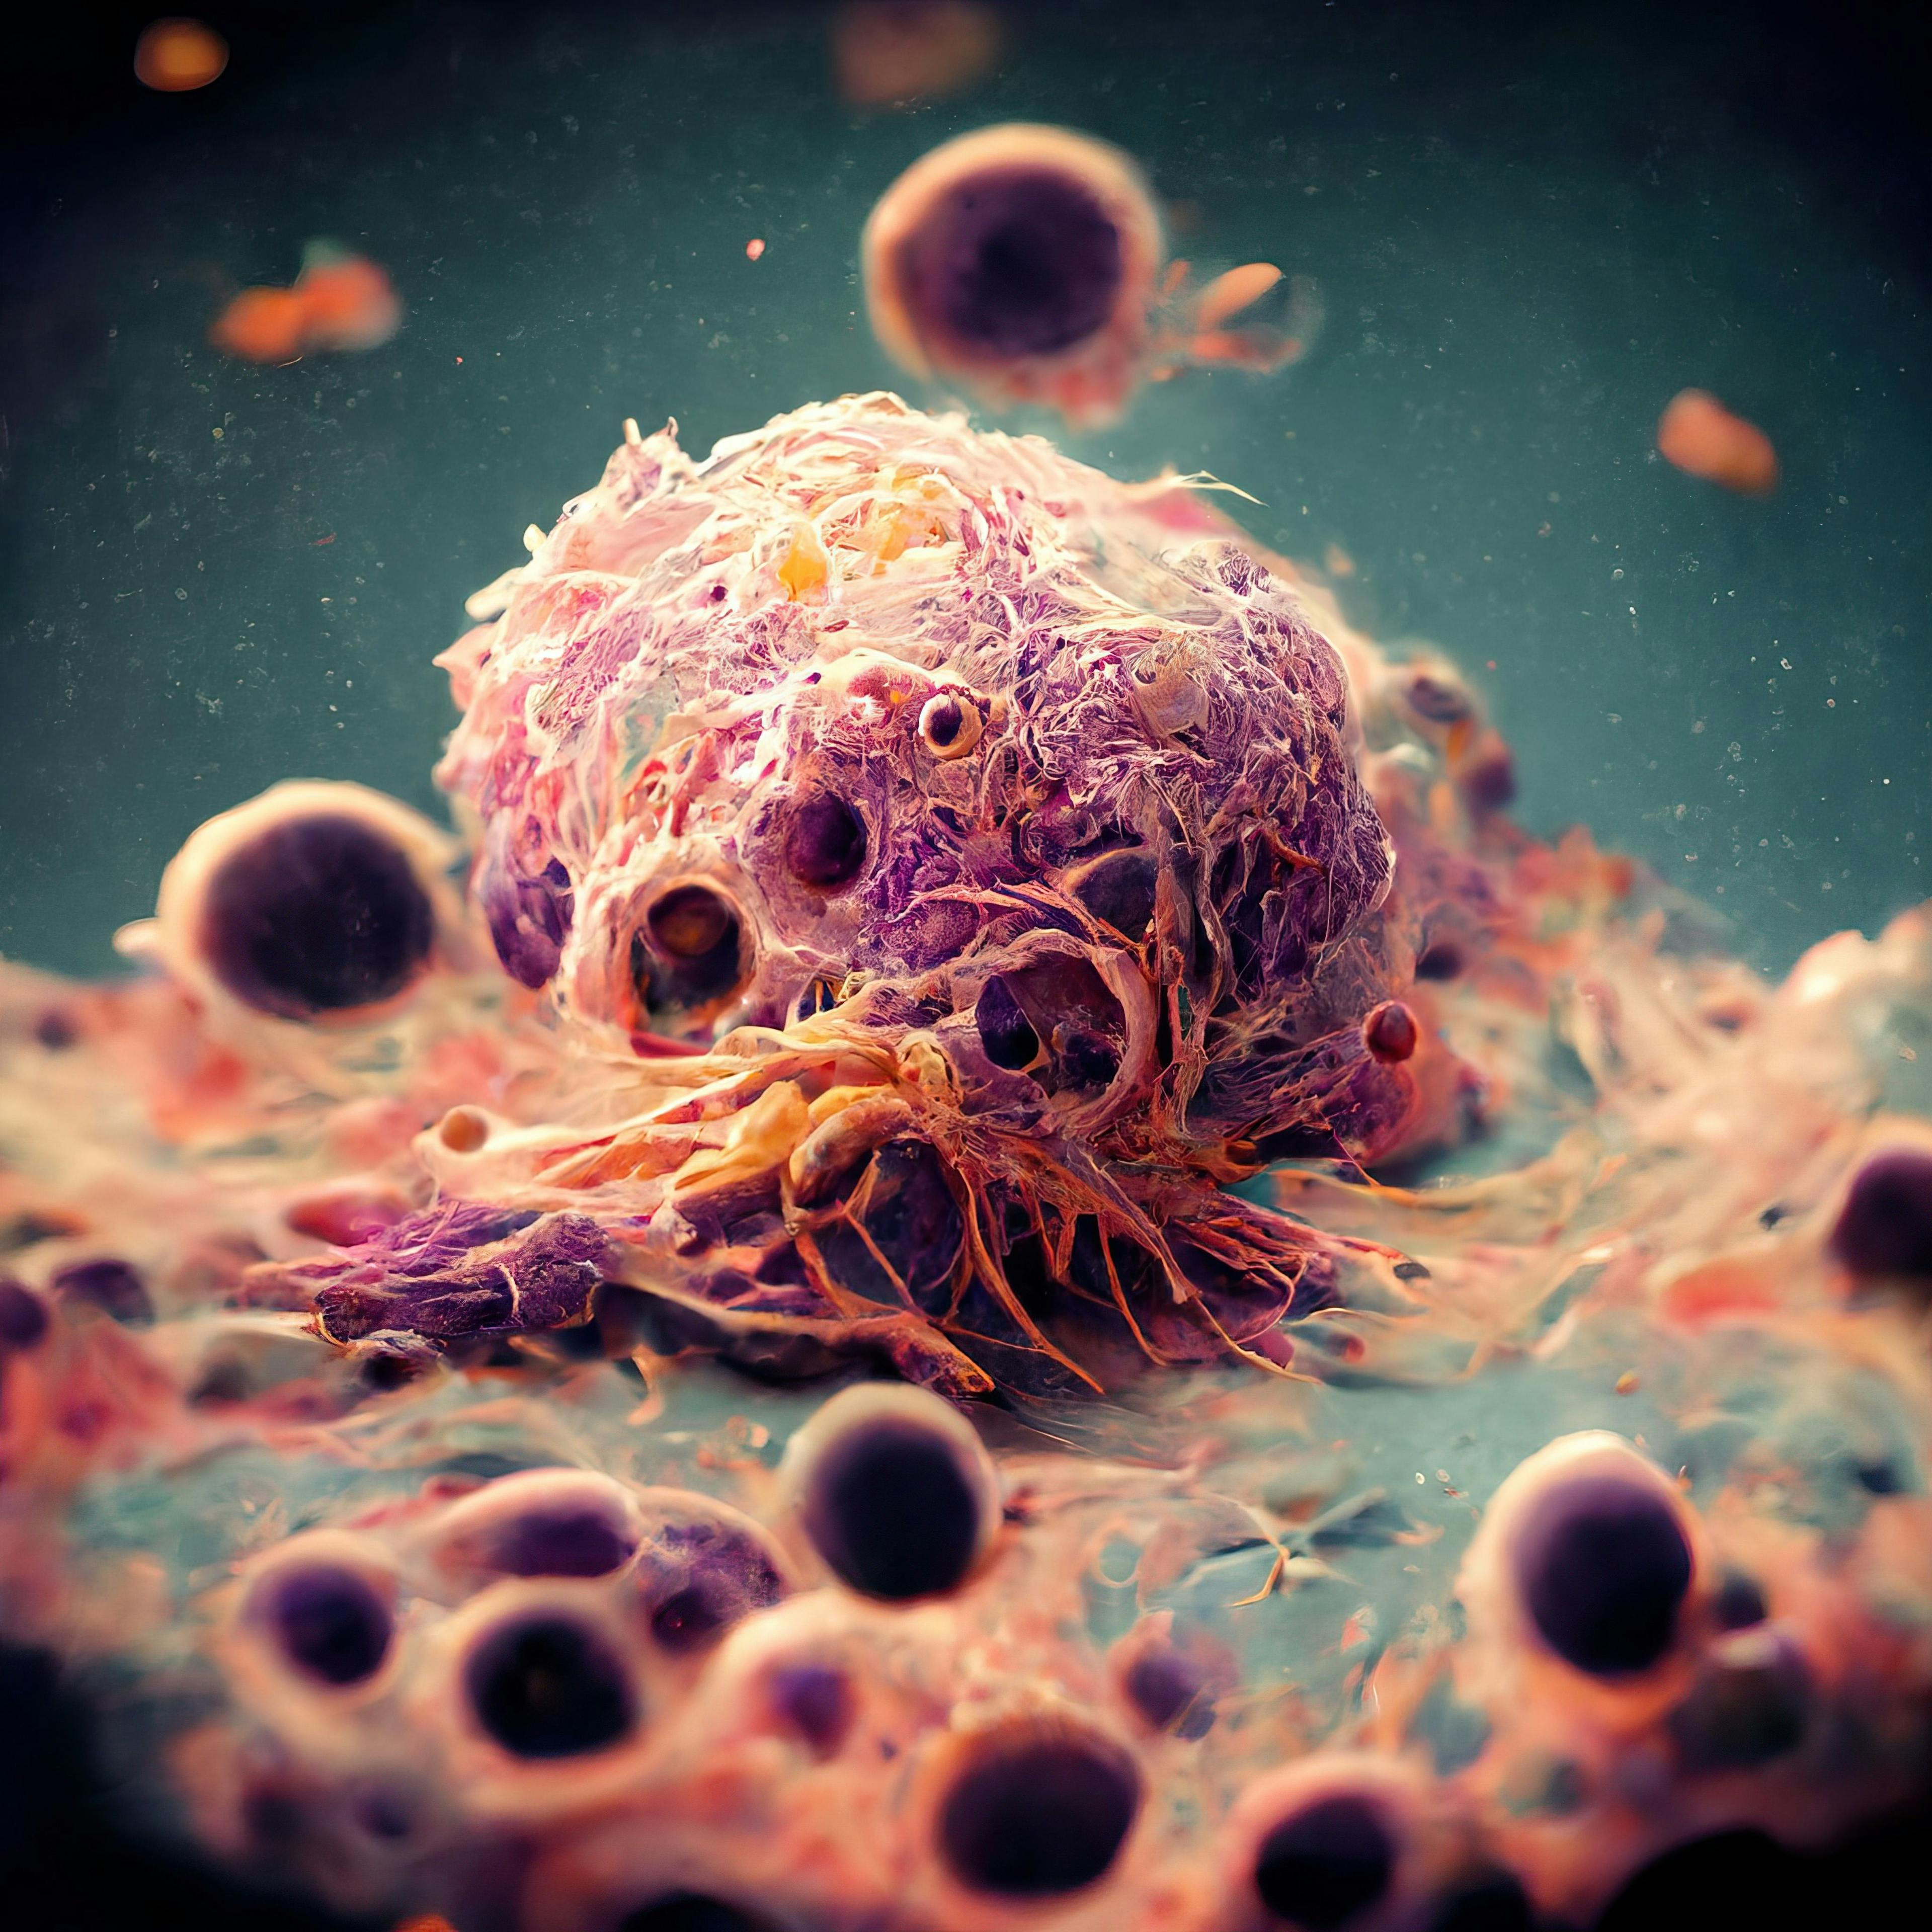 Cancer cells and cancerous malignant cell tumour growth in a human body caused by carcinogens and genetics, leukemia or lymphoma, chemotherapy or radiation therapy: © Rick - stock.adobe.com